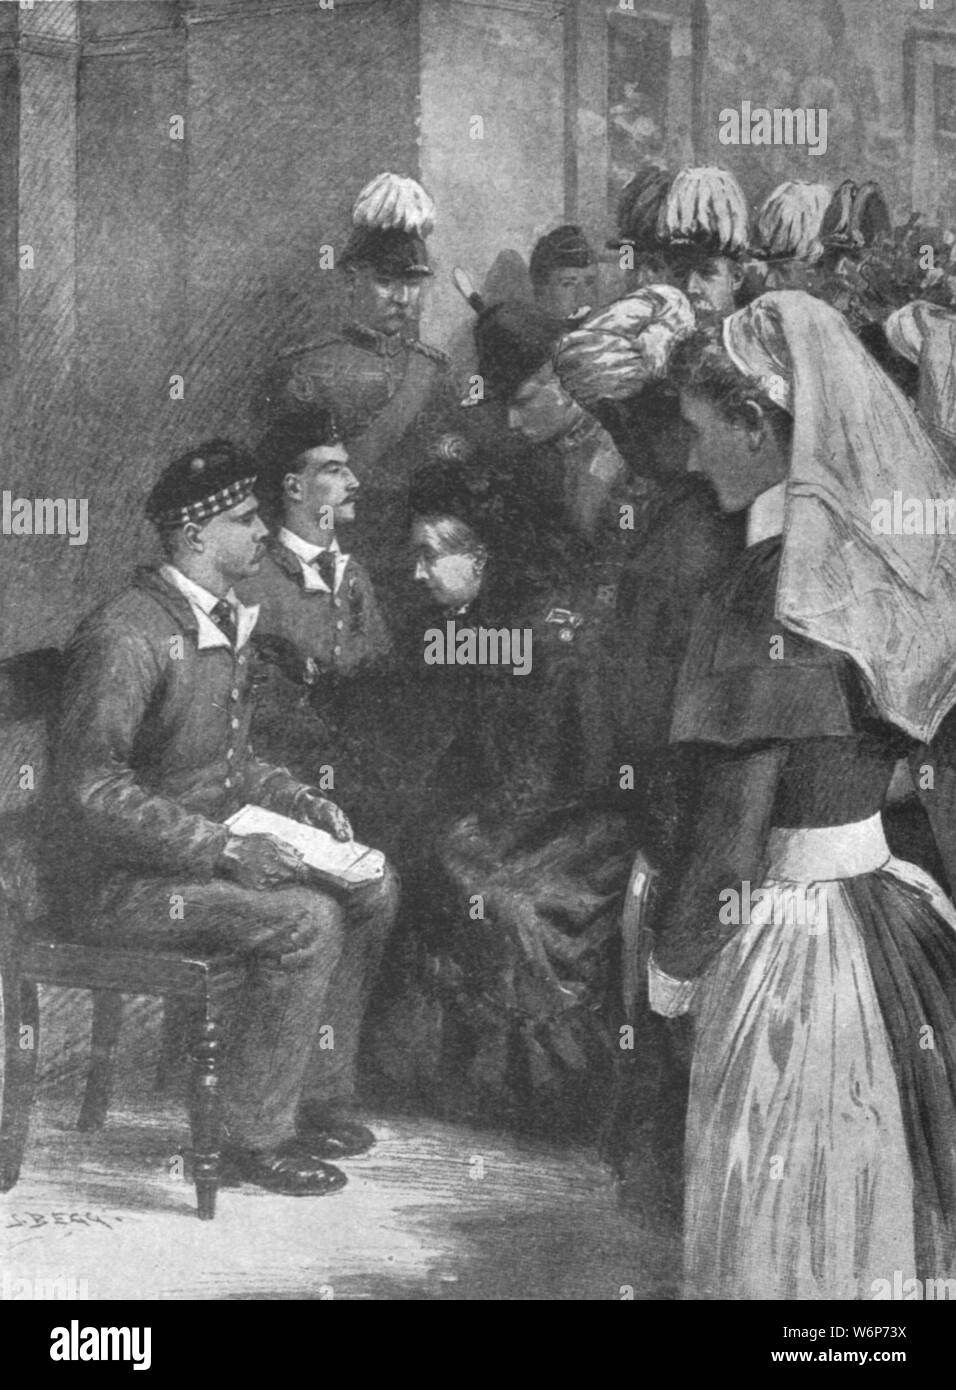 'Queen Victoria conferring the Victoria Cross on heroes of Dargai at Netley Hospital, May 14, 1898', (1901). Victoria (1819-1901) presents awards for bravery to injured men of the British Army who fought in the Indian northwestern province, (now Pakistan). From &quot;The Illustrated London News Record of the Glorious Reign of Queen Victoria 1837-1901: The Life and Accession of King Edward VII. and the Life of Queen Alexandra&quot;. [London, 1901] Stock Photo